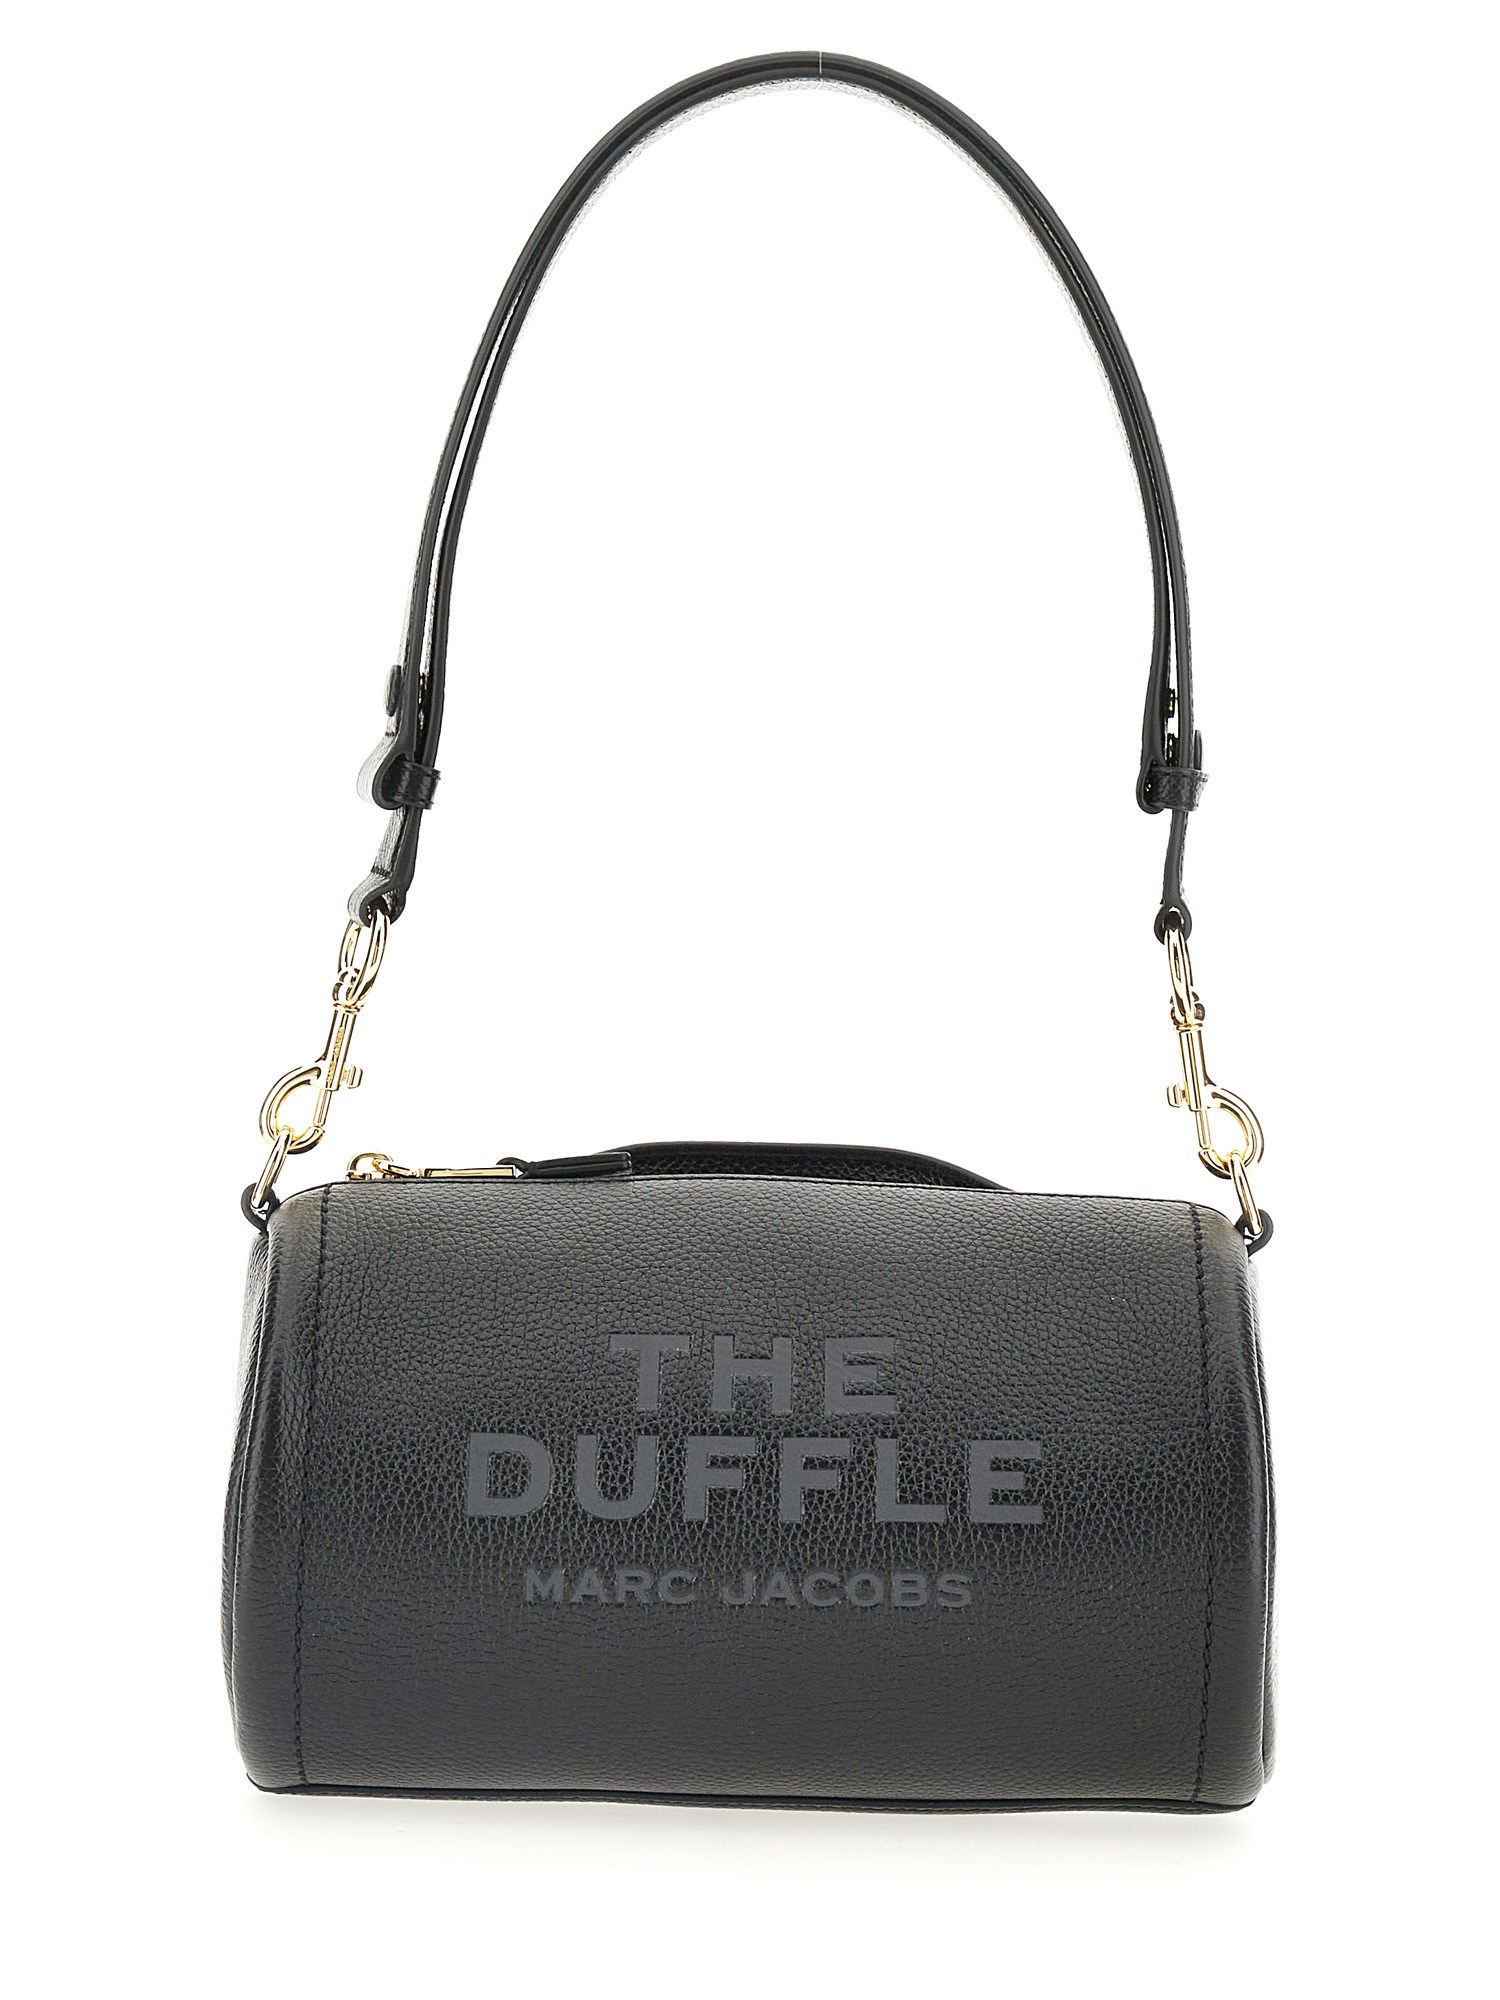 marc jacobs the duffle bag